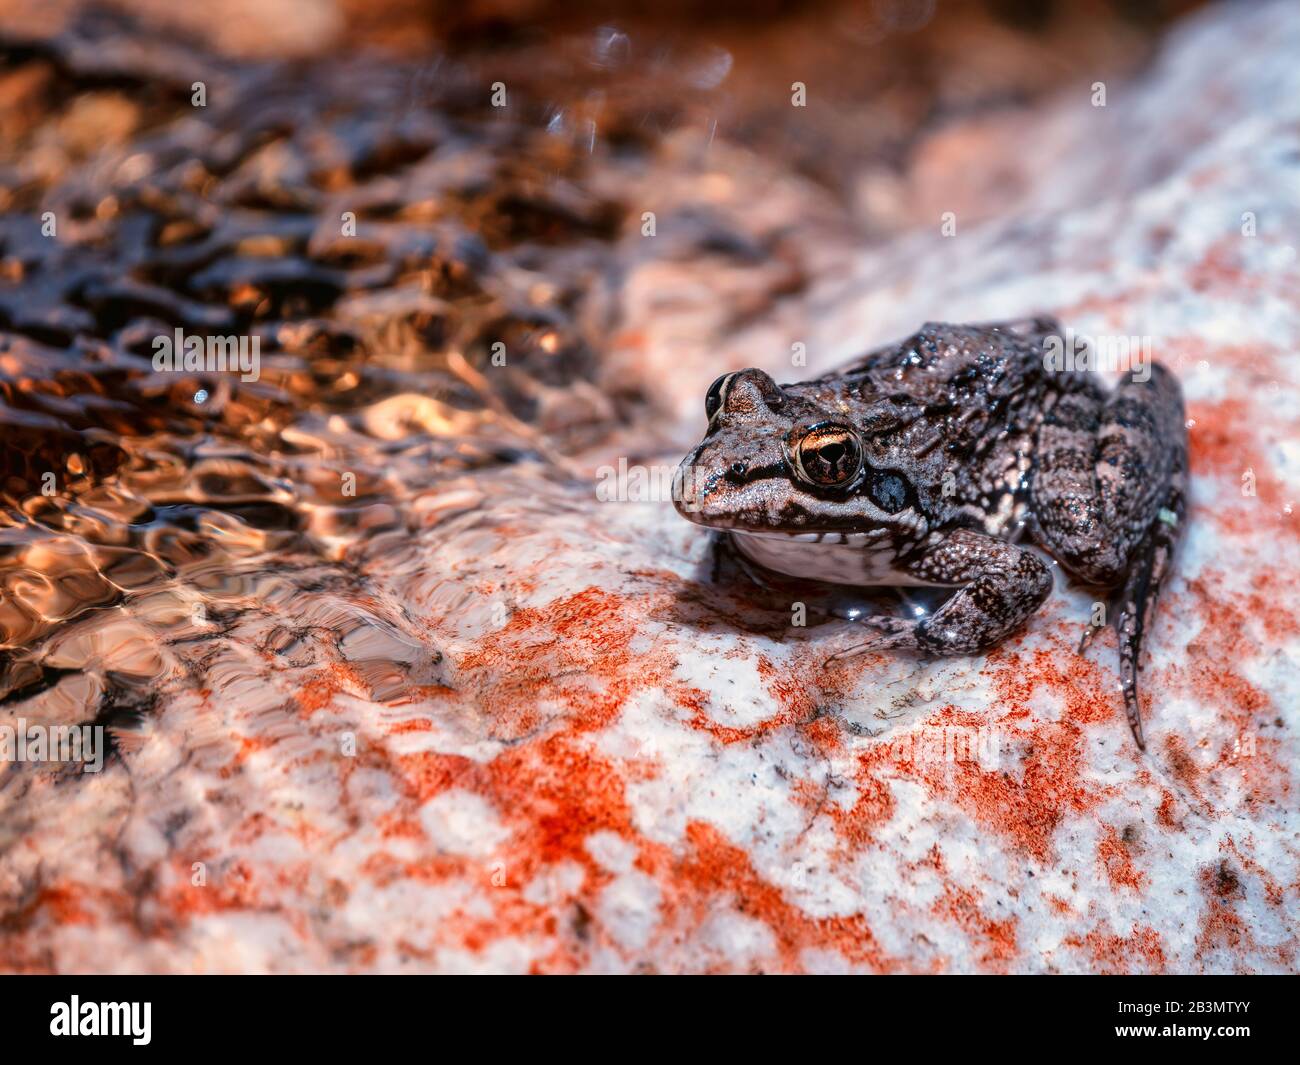 A Cape River Frog sits on a white and orange speckled boulder in a stream, the water swirling and bubbling around it Stock Photo